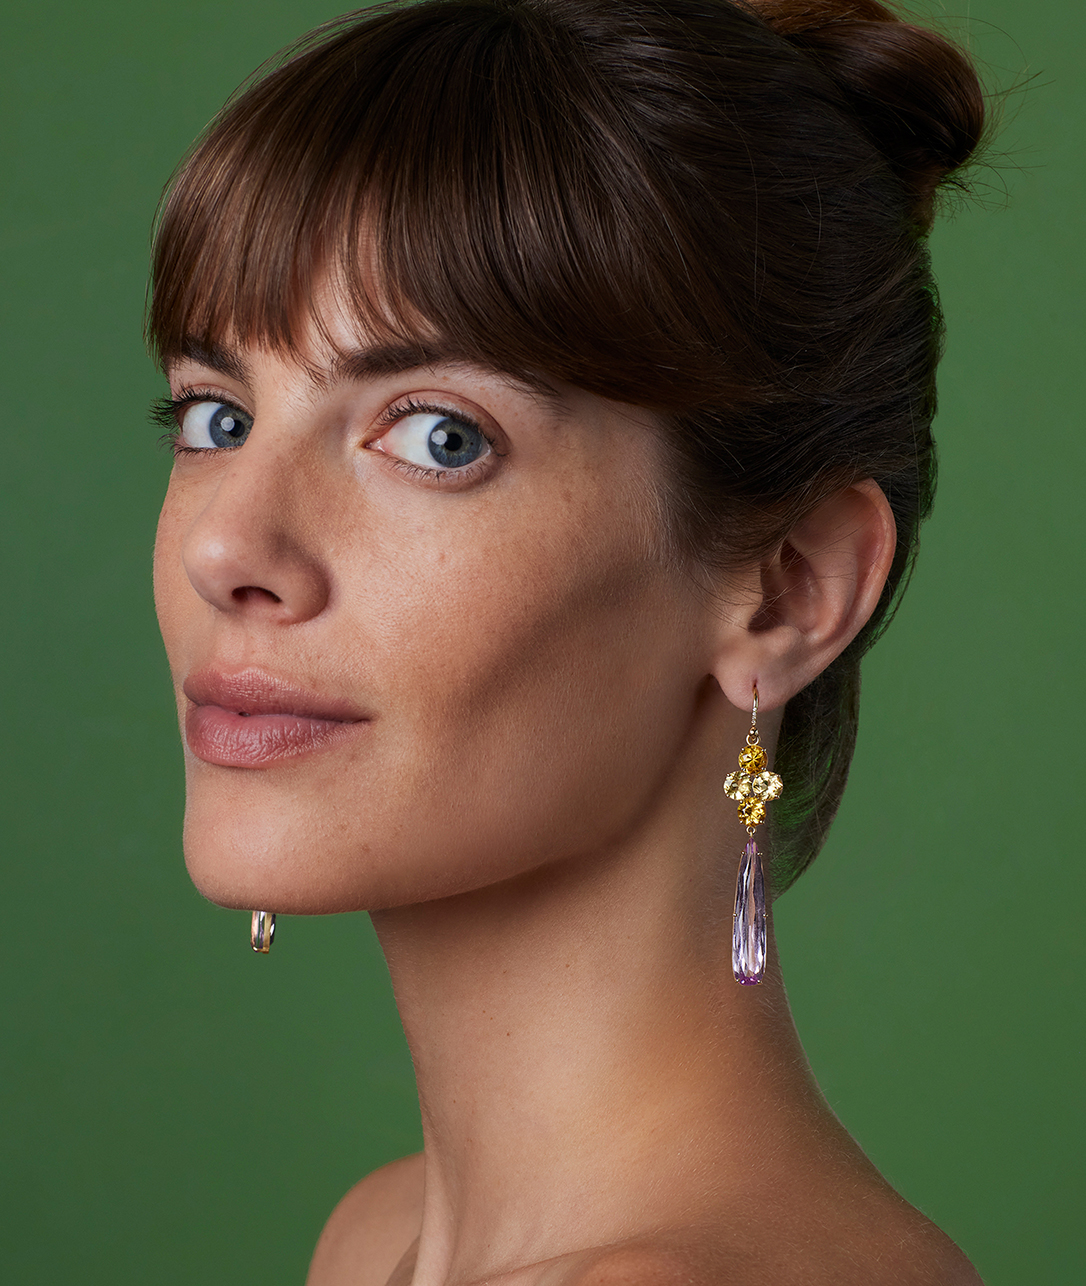 Our new Domino Drop Earrings feature quartets of dynamic yellow beryl and exquisite pear shaped kunzites.